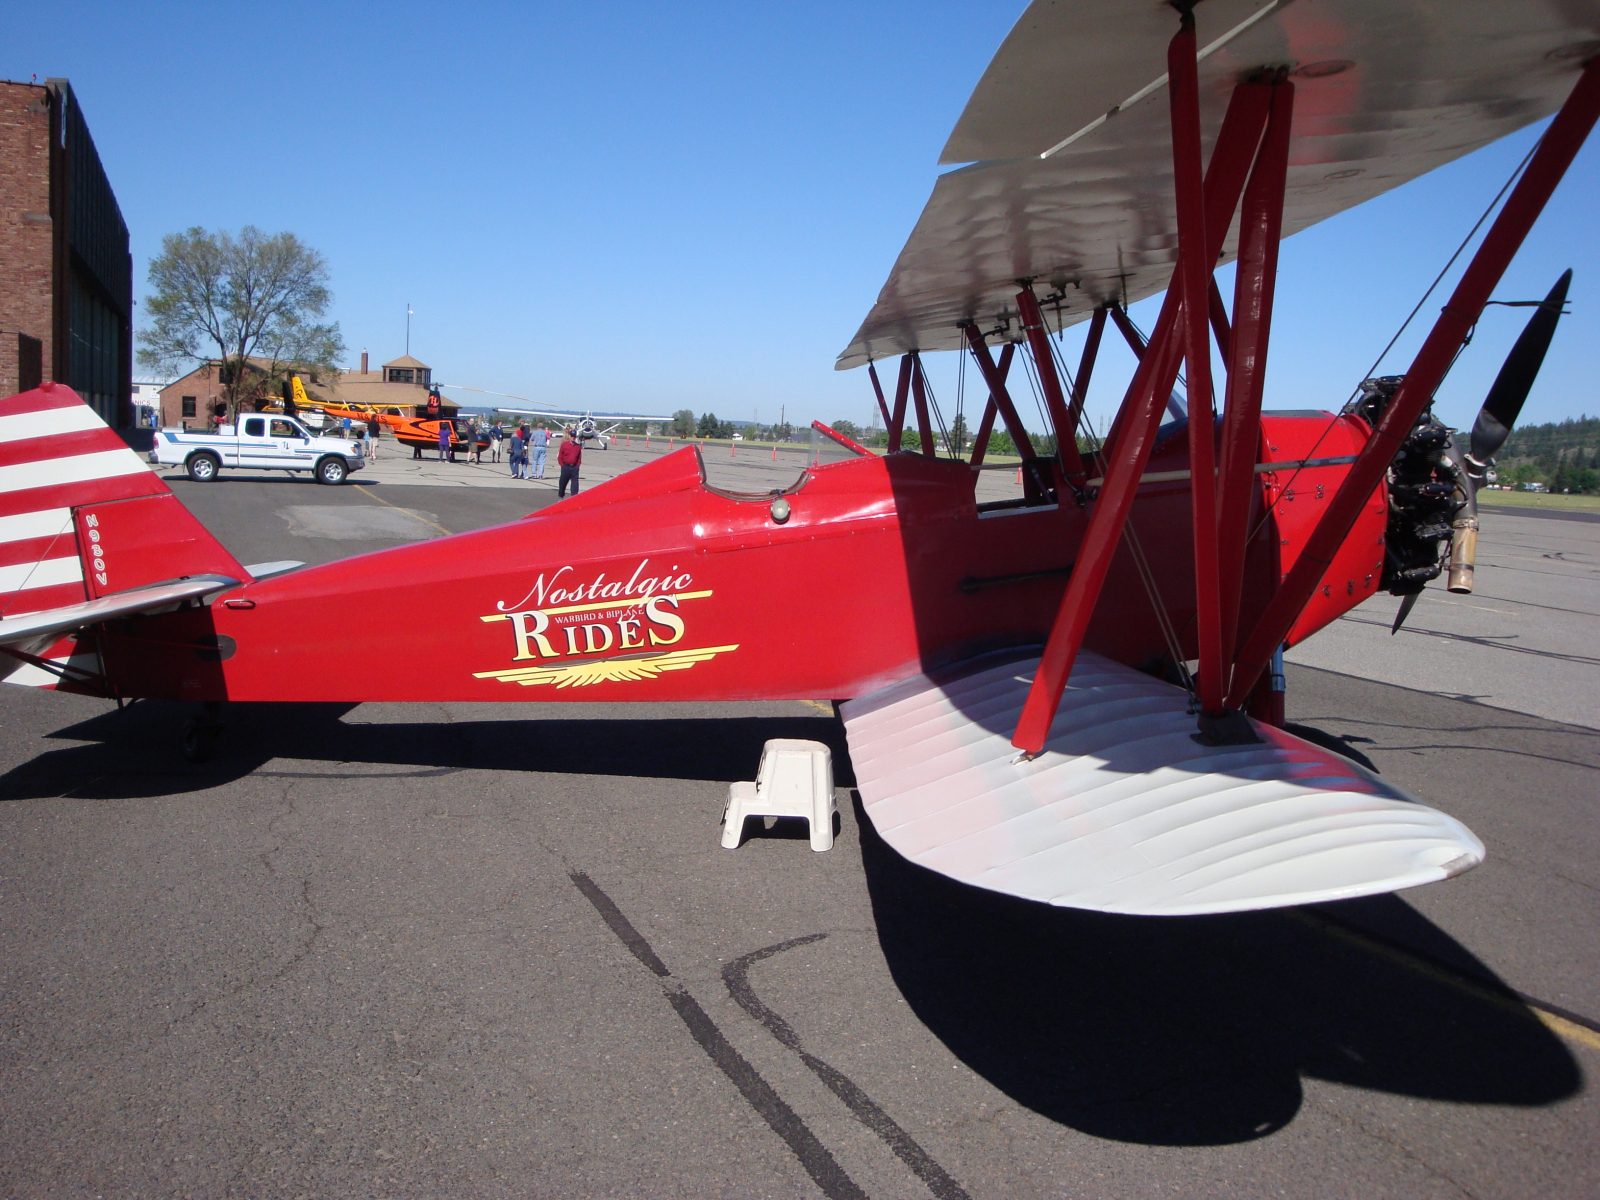 At an air show I was first in line for a ride on this antique Biplane.